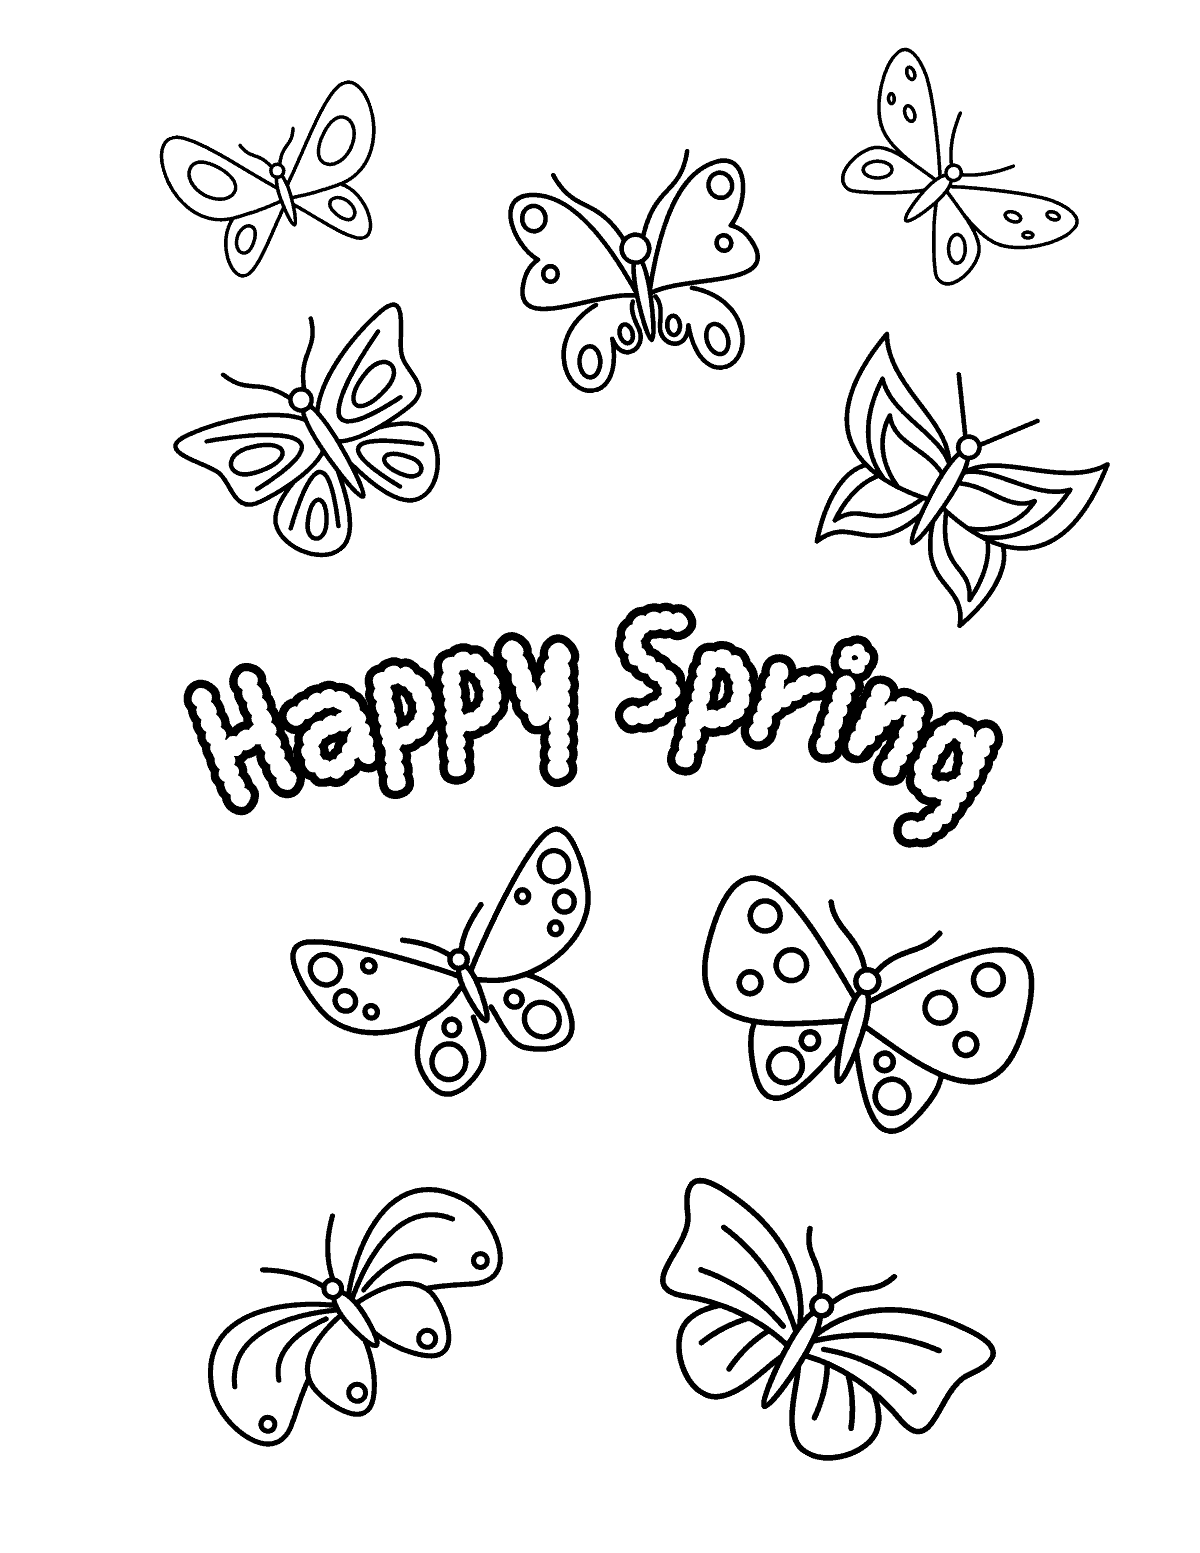 Coloring page with butterflies and the text happy spring